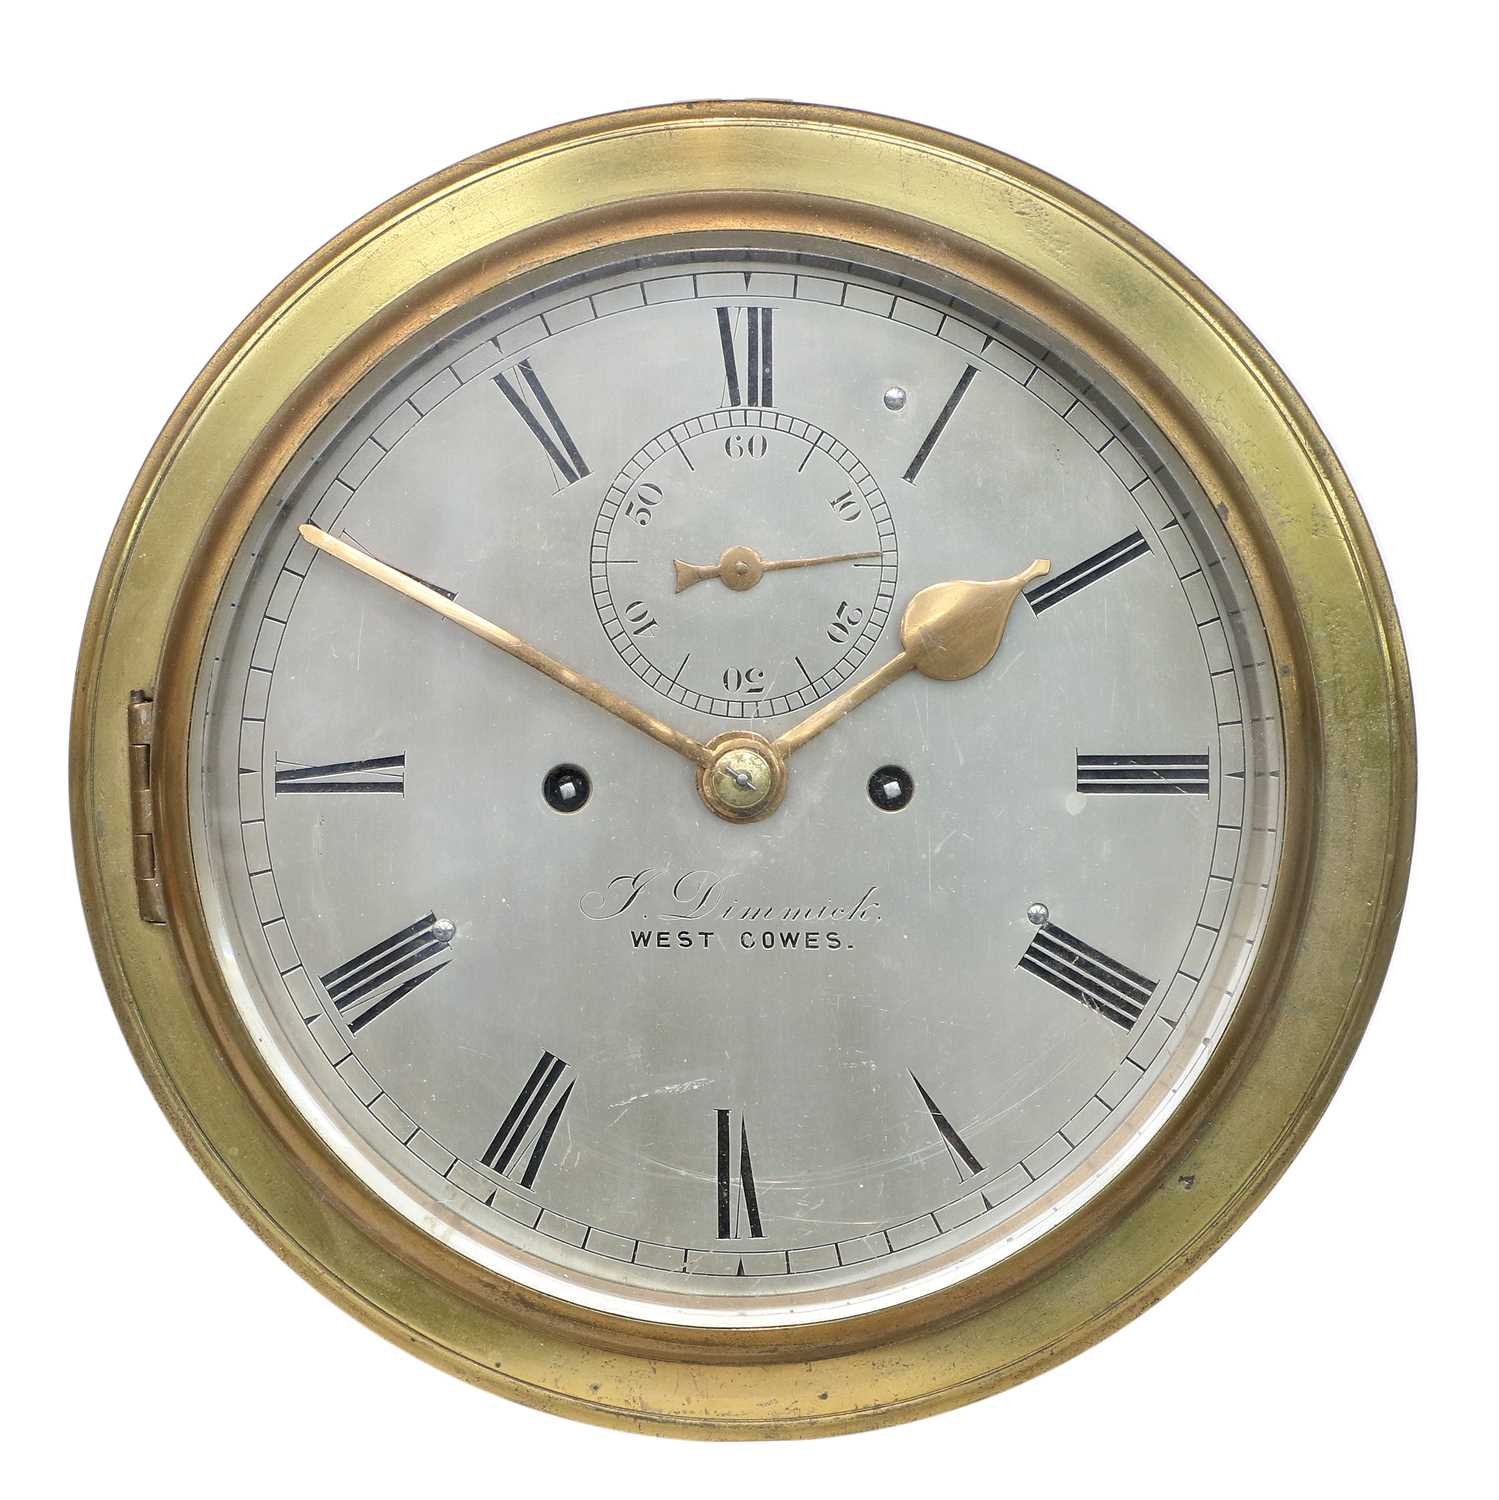 A Ships Type BulkHead Striking Wall Clock, signed J Dimmick, West Cowes, circa 1890, brass cast